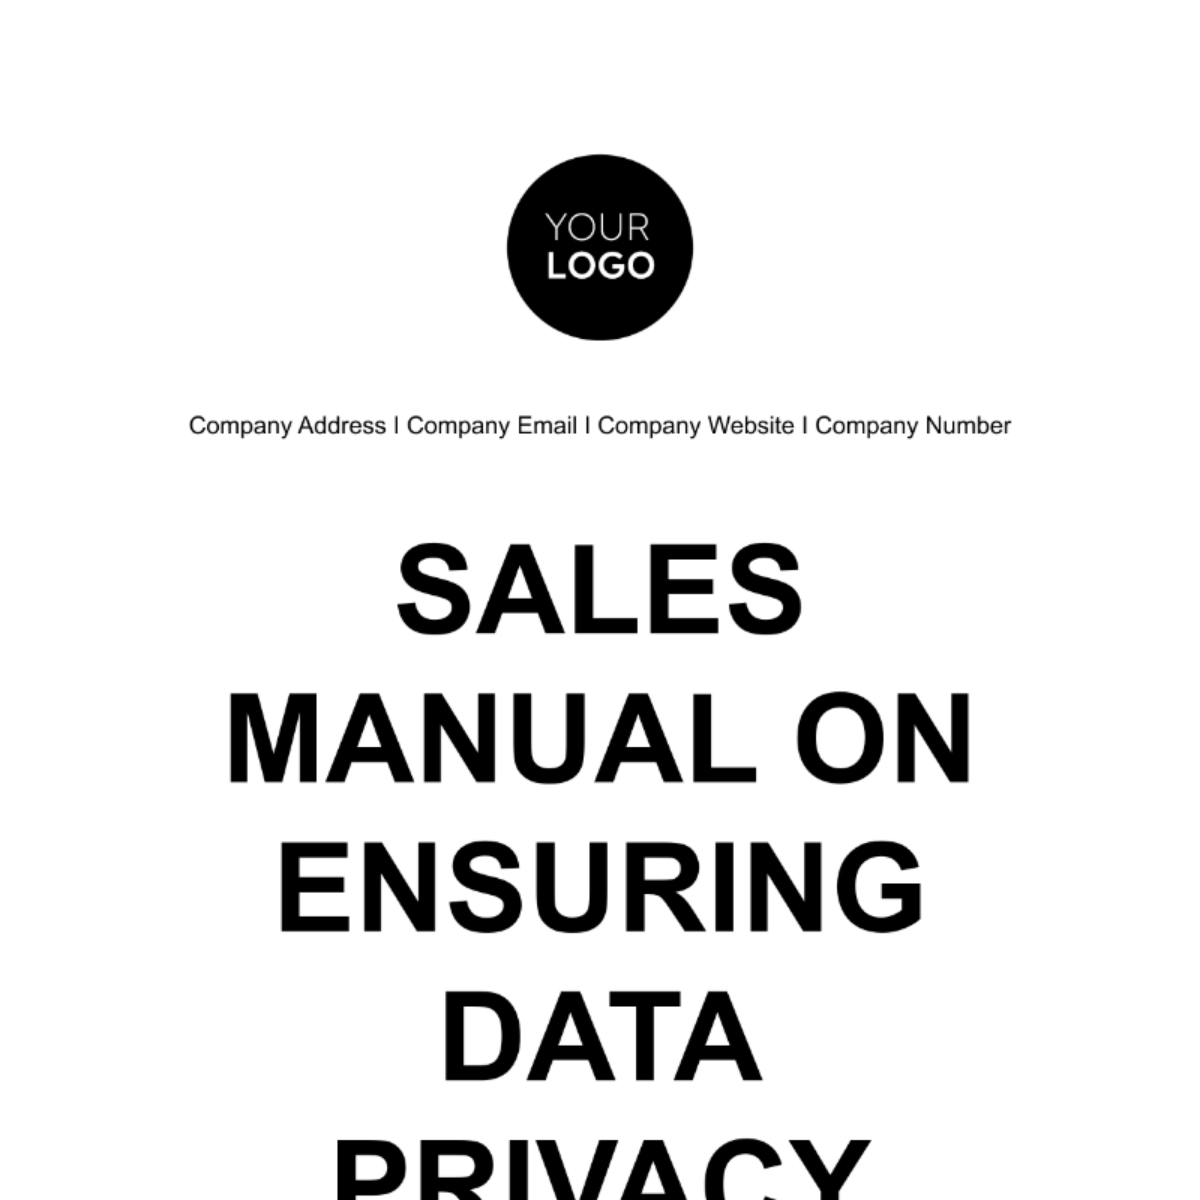 Sales Manual on Ensuring Data Privacy Template